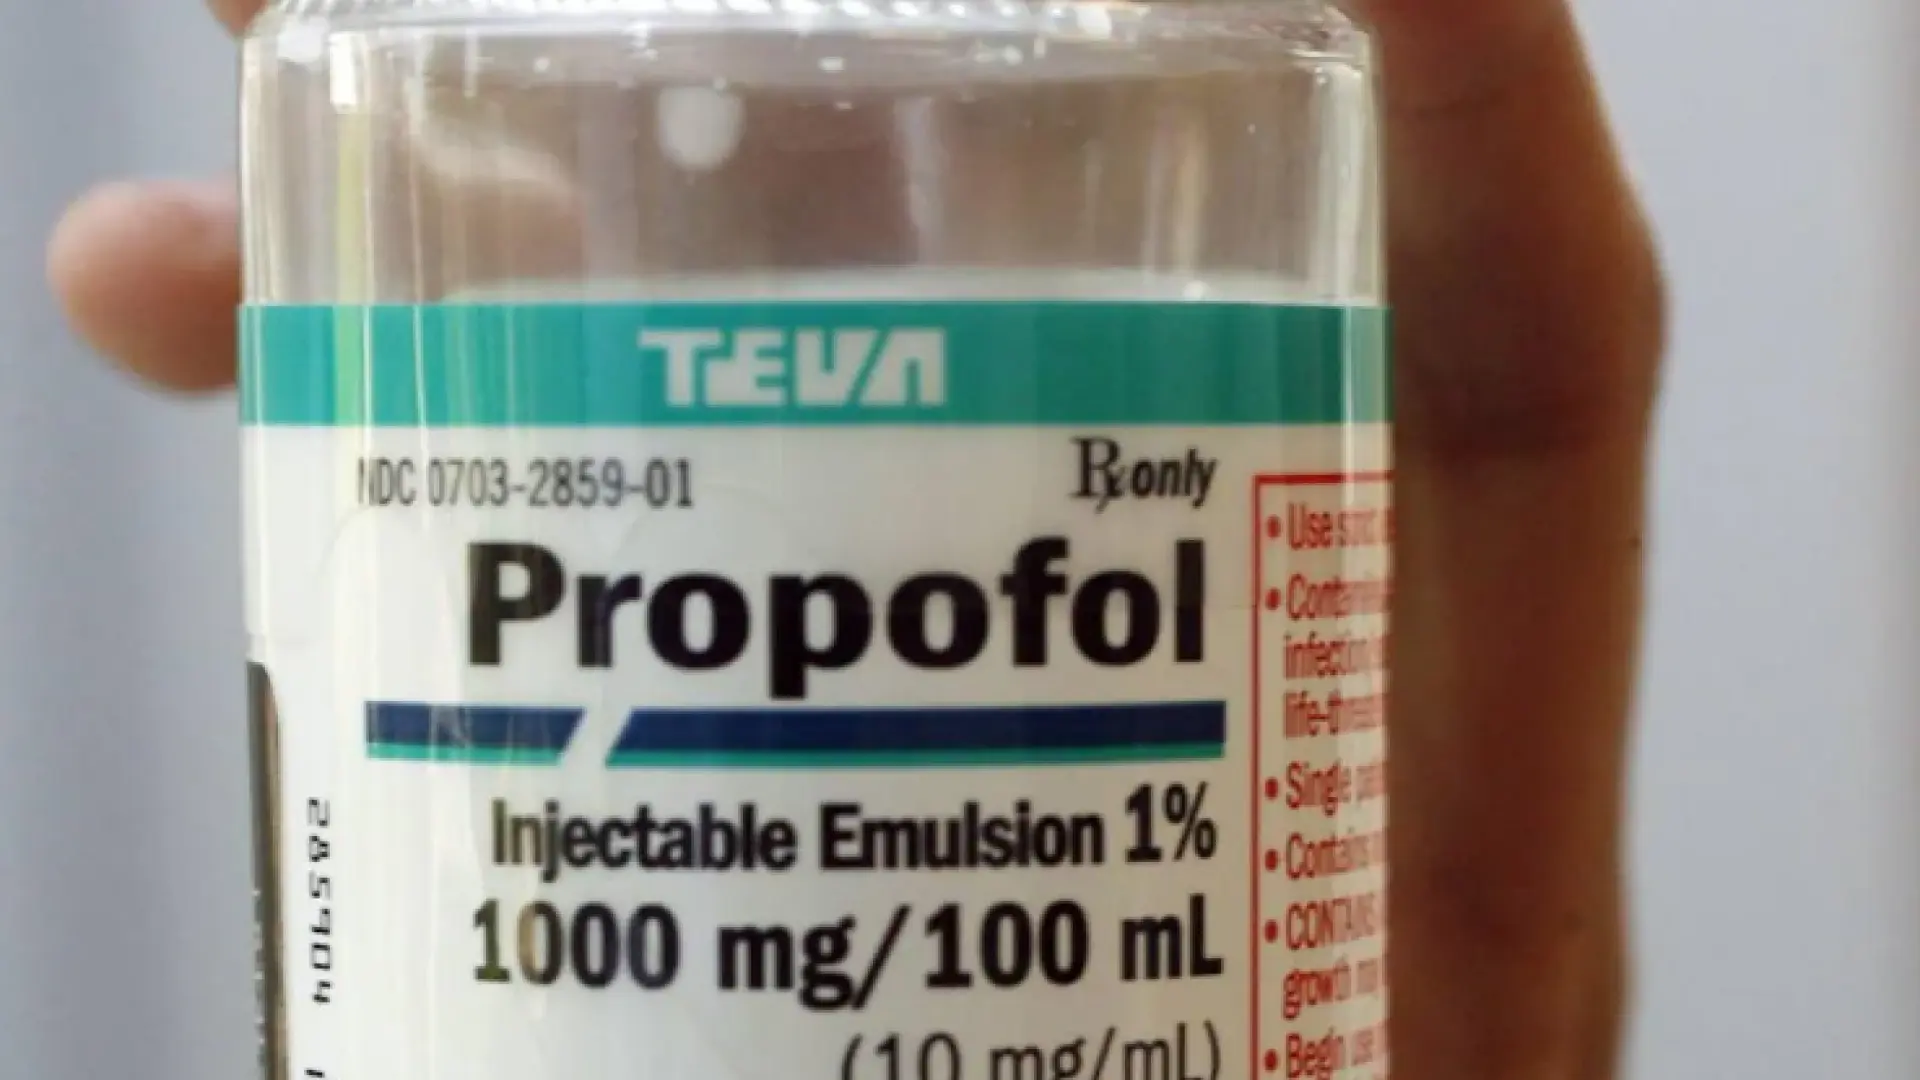 The drug propofol causes loss of consciousness by altering the normal balance of the brain.